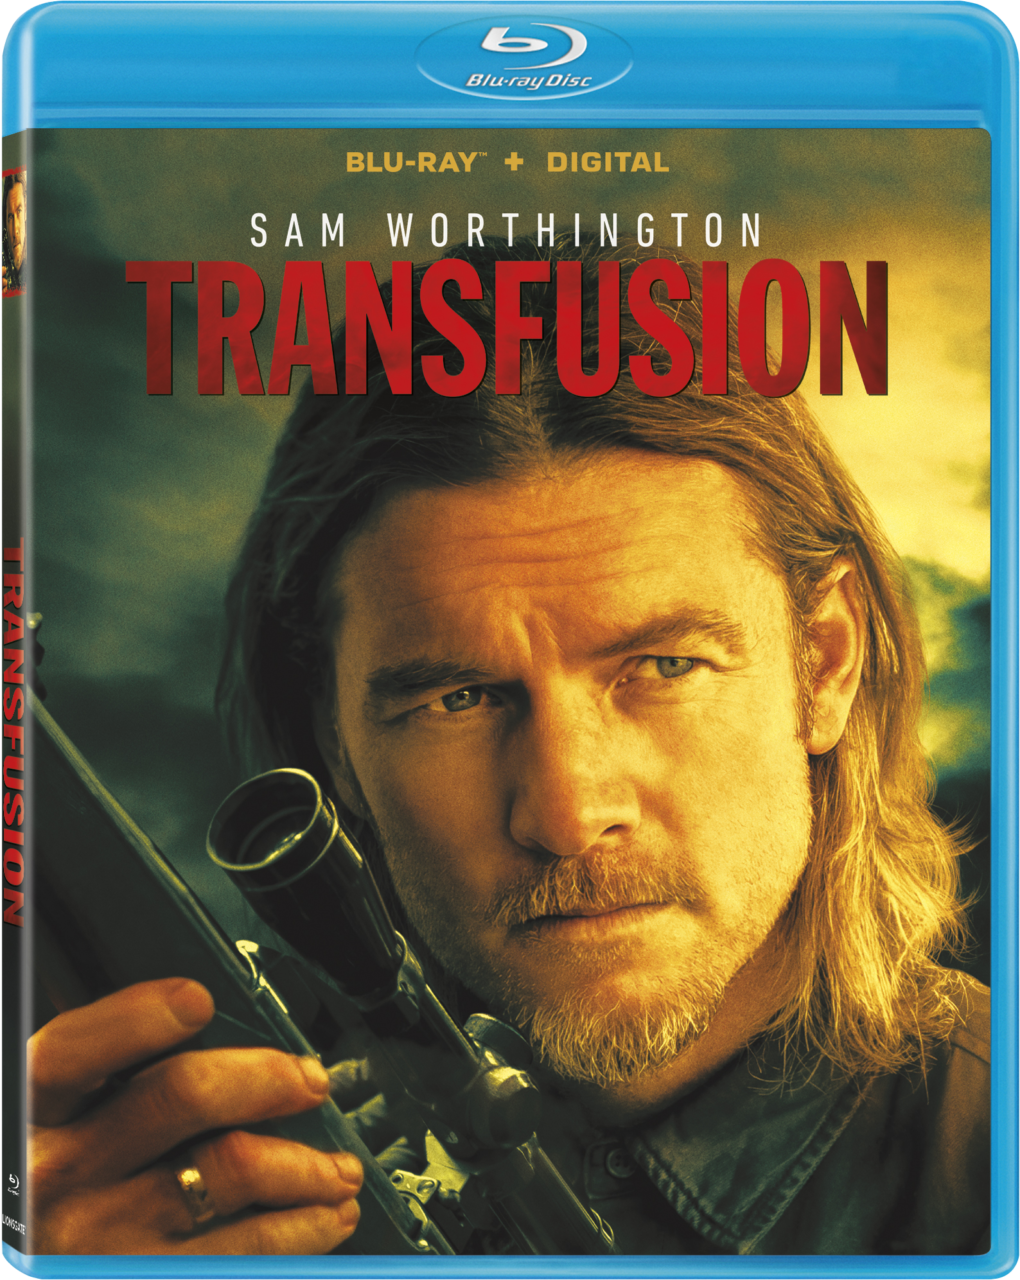 Transfusion Blu-Ray Combo Pack cover (Lionsgate)